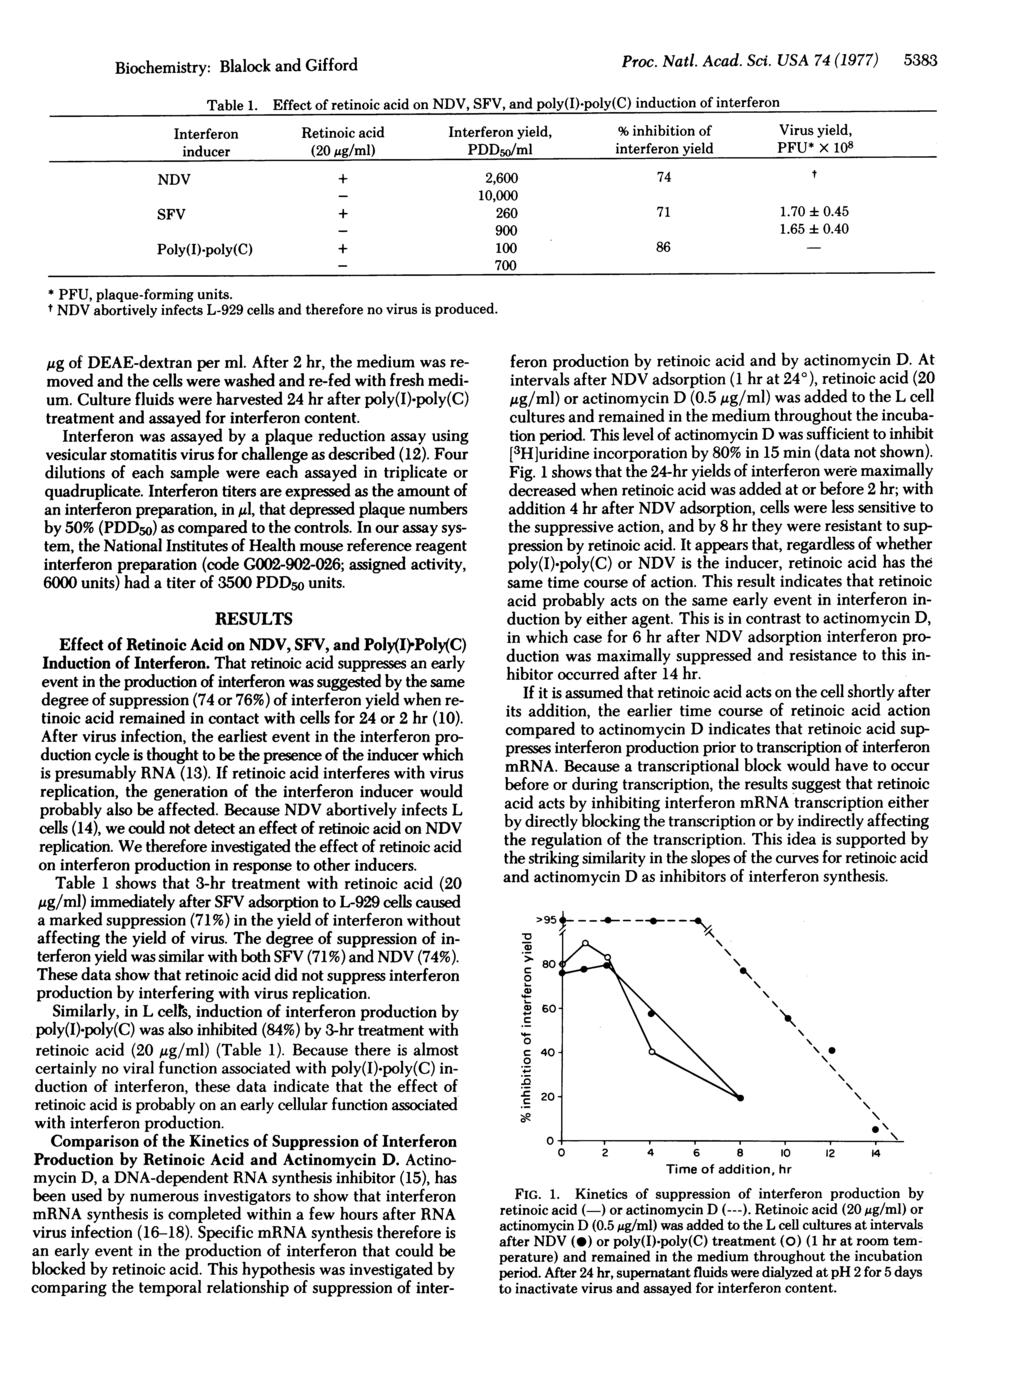 Biochemistry: Blalock and Gifford Table 1. Effect of retinoic acid on NDV, SFV, and poly(i)-poly(c) induction of interferon Proc. Natl. Acad. Sci.